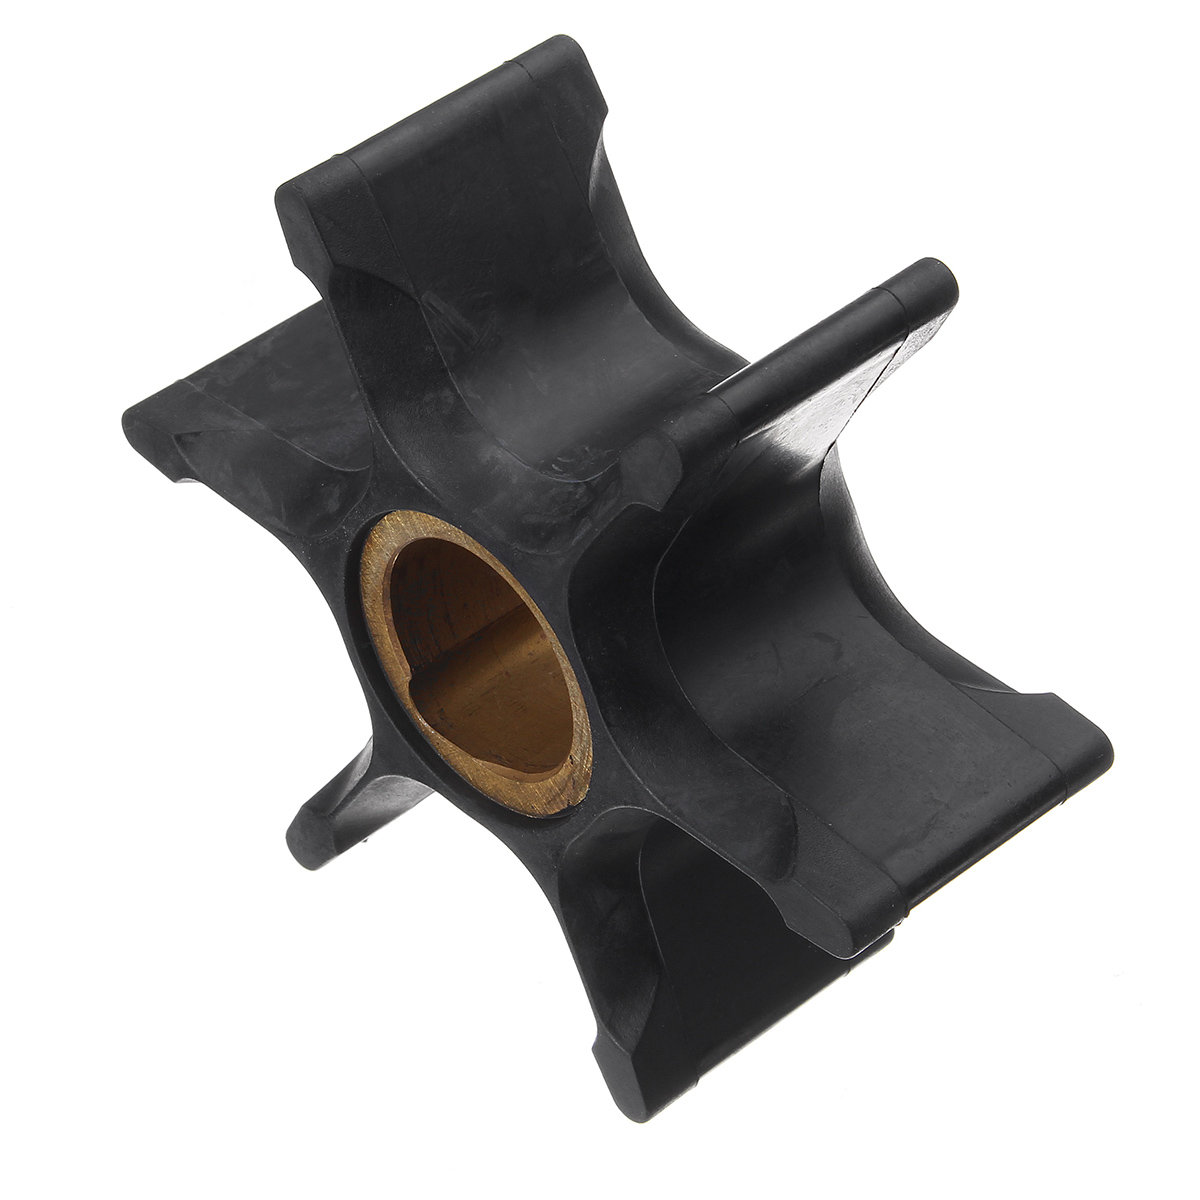 Water Pump Impeller for Johnson/Evinrude 90-300HP Outboard Replacement 18-3059 - Auto GoShop